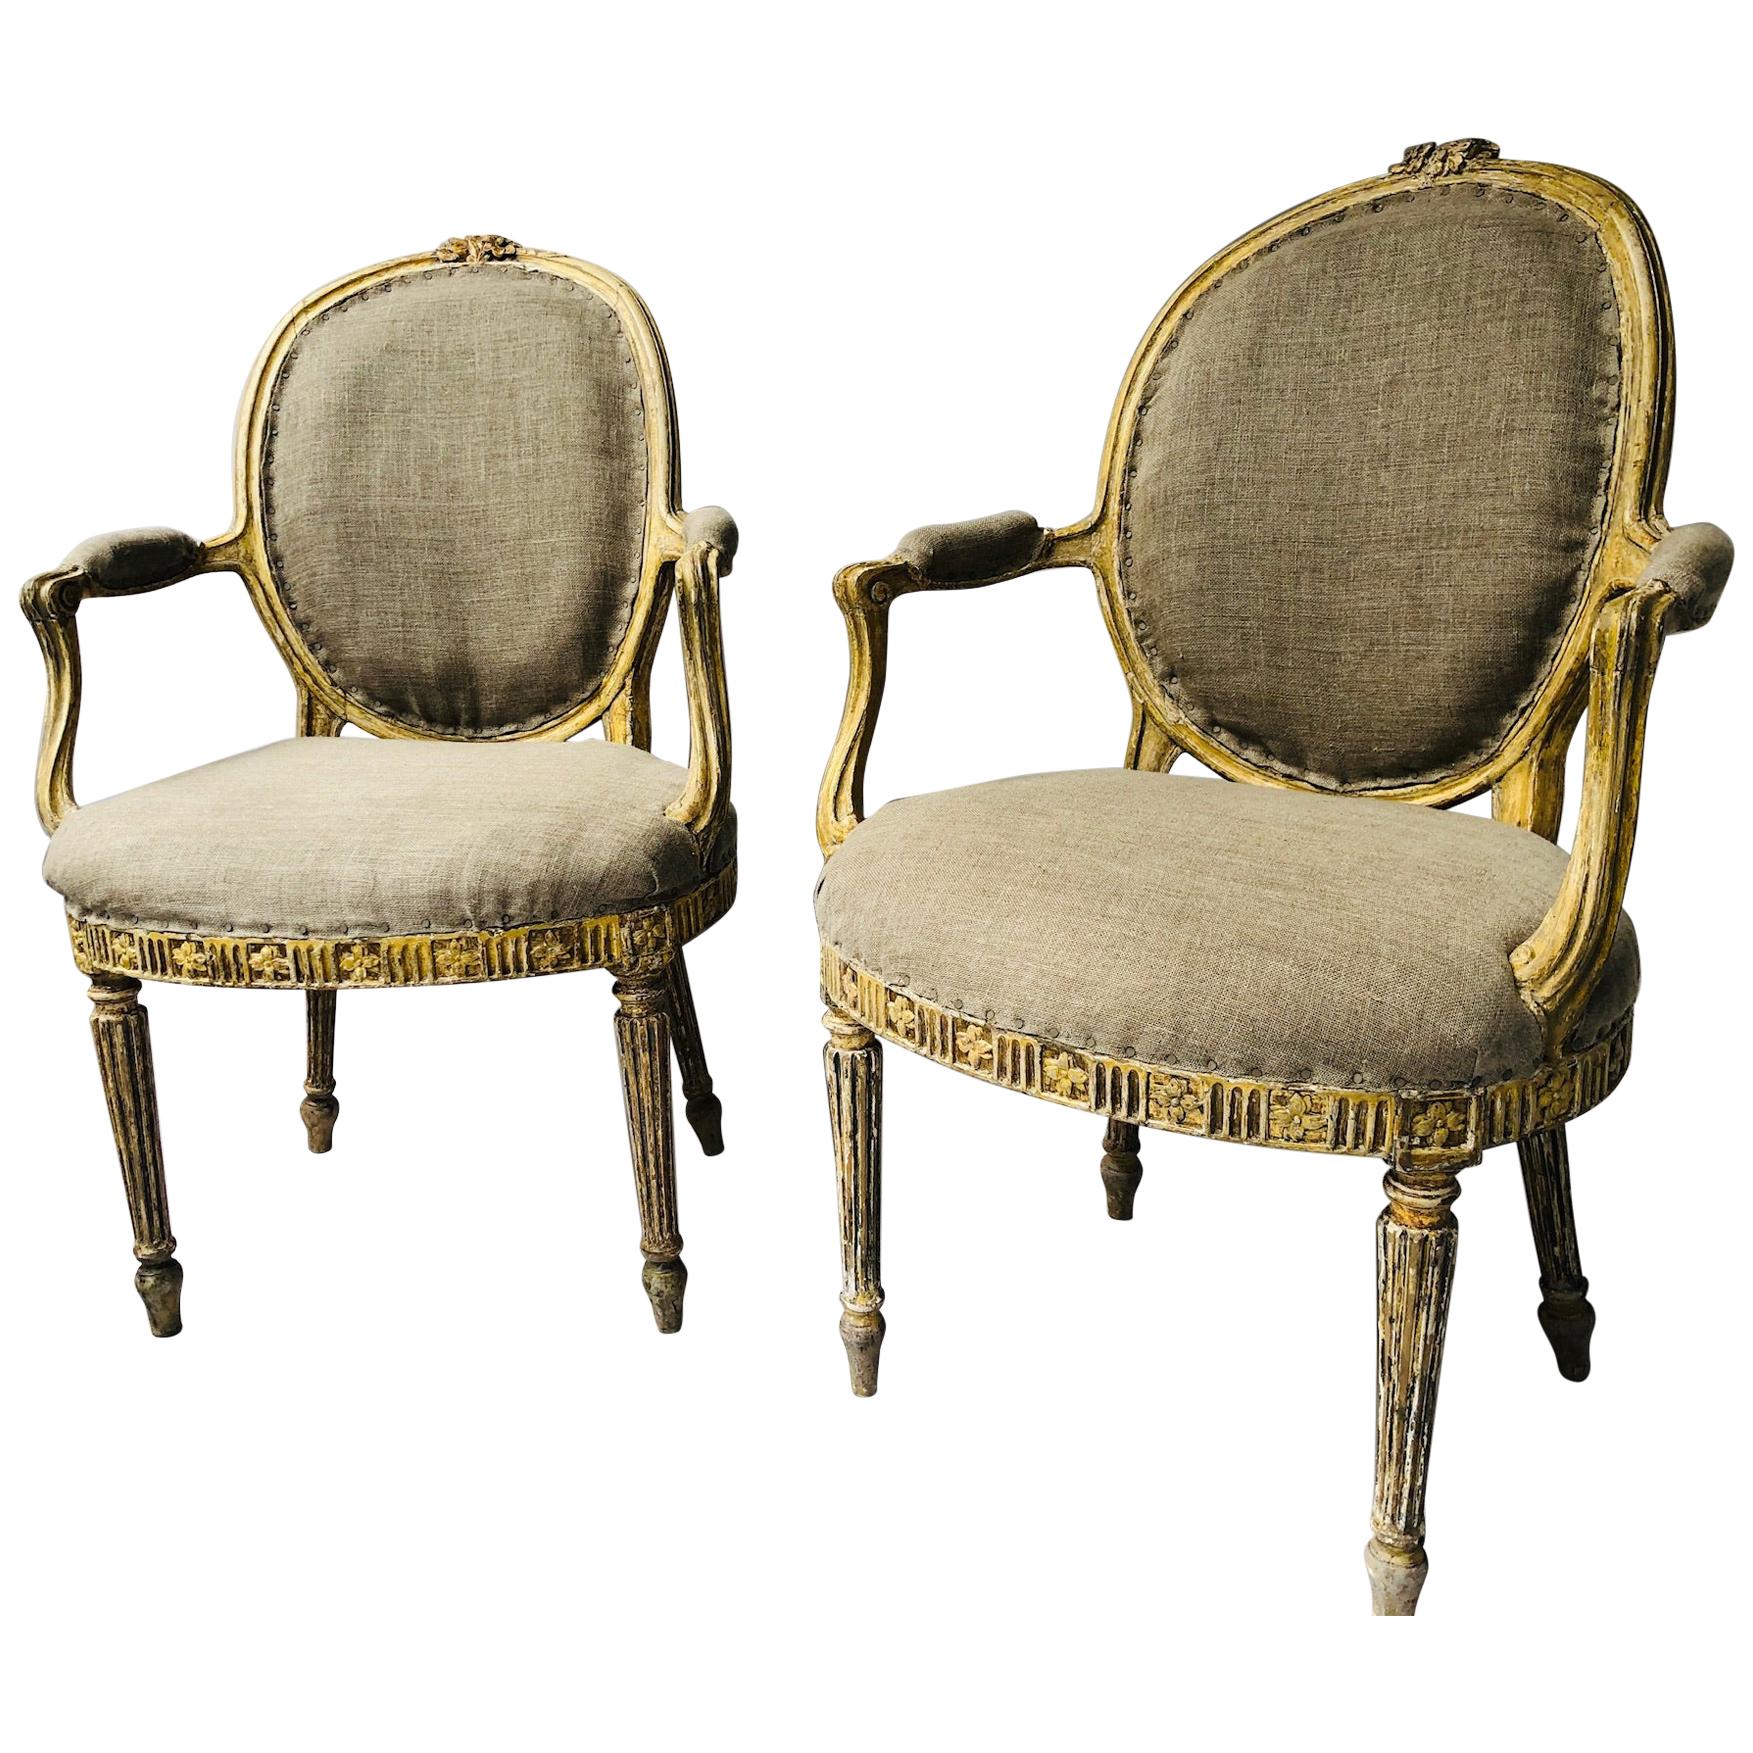 Pair of George III Parcel-Gilt Armchairs in the Manner of John Linnell For Sale